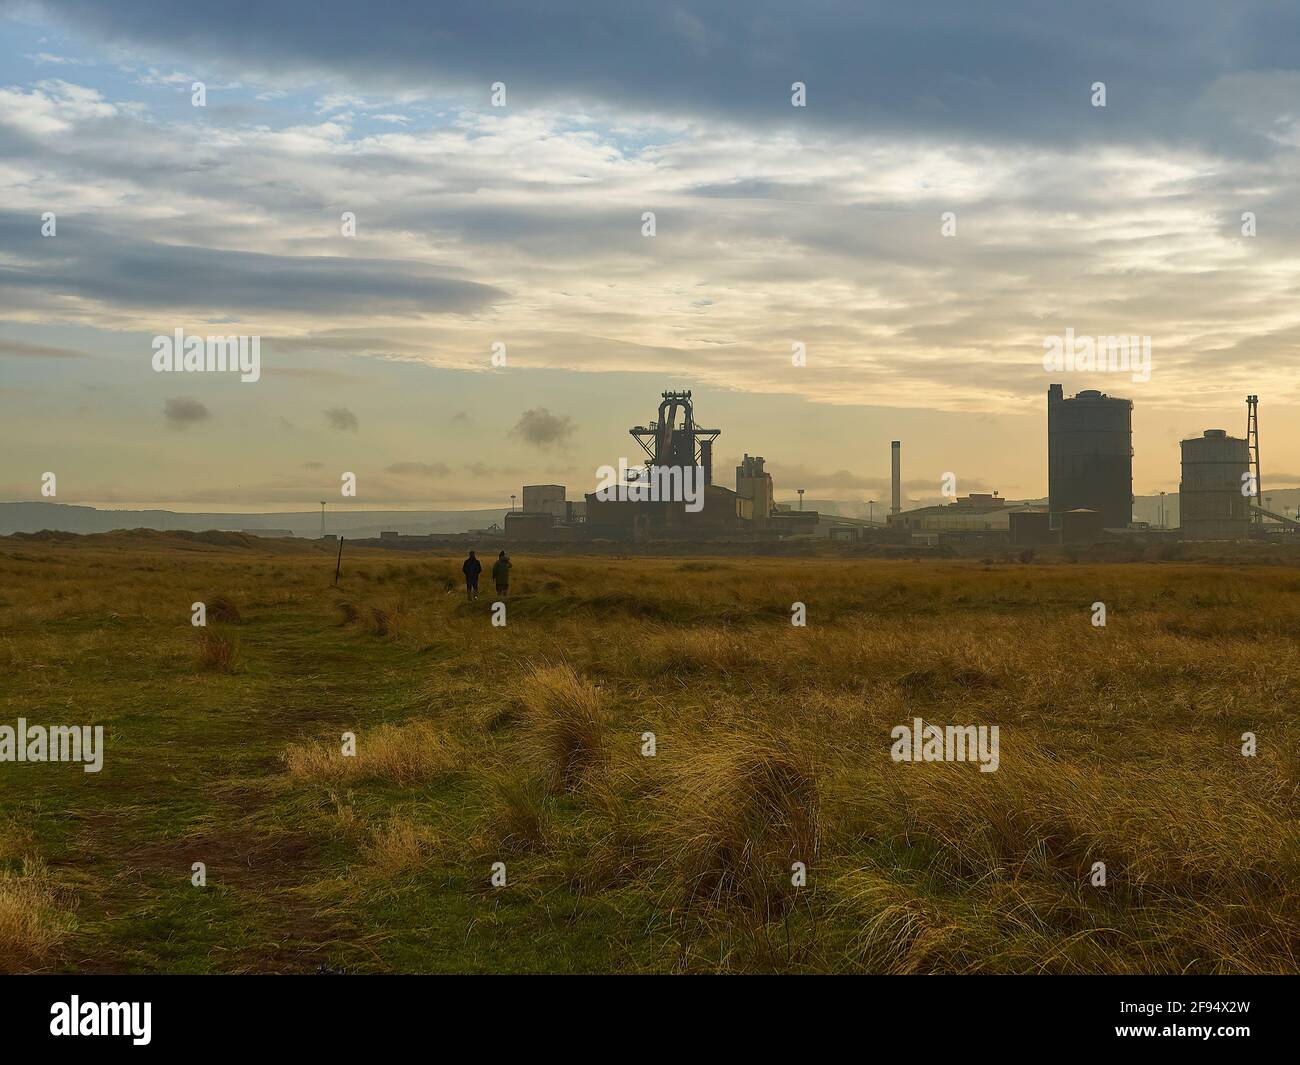 An expanse of dune grass-swathed slagfields and sky, separated by Redcar Steelworks, Two tiny, silhouetted people give a sense of scale. Stock Photo